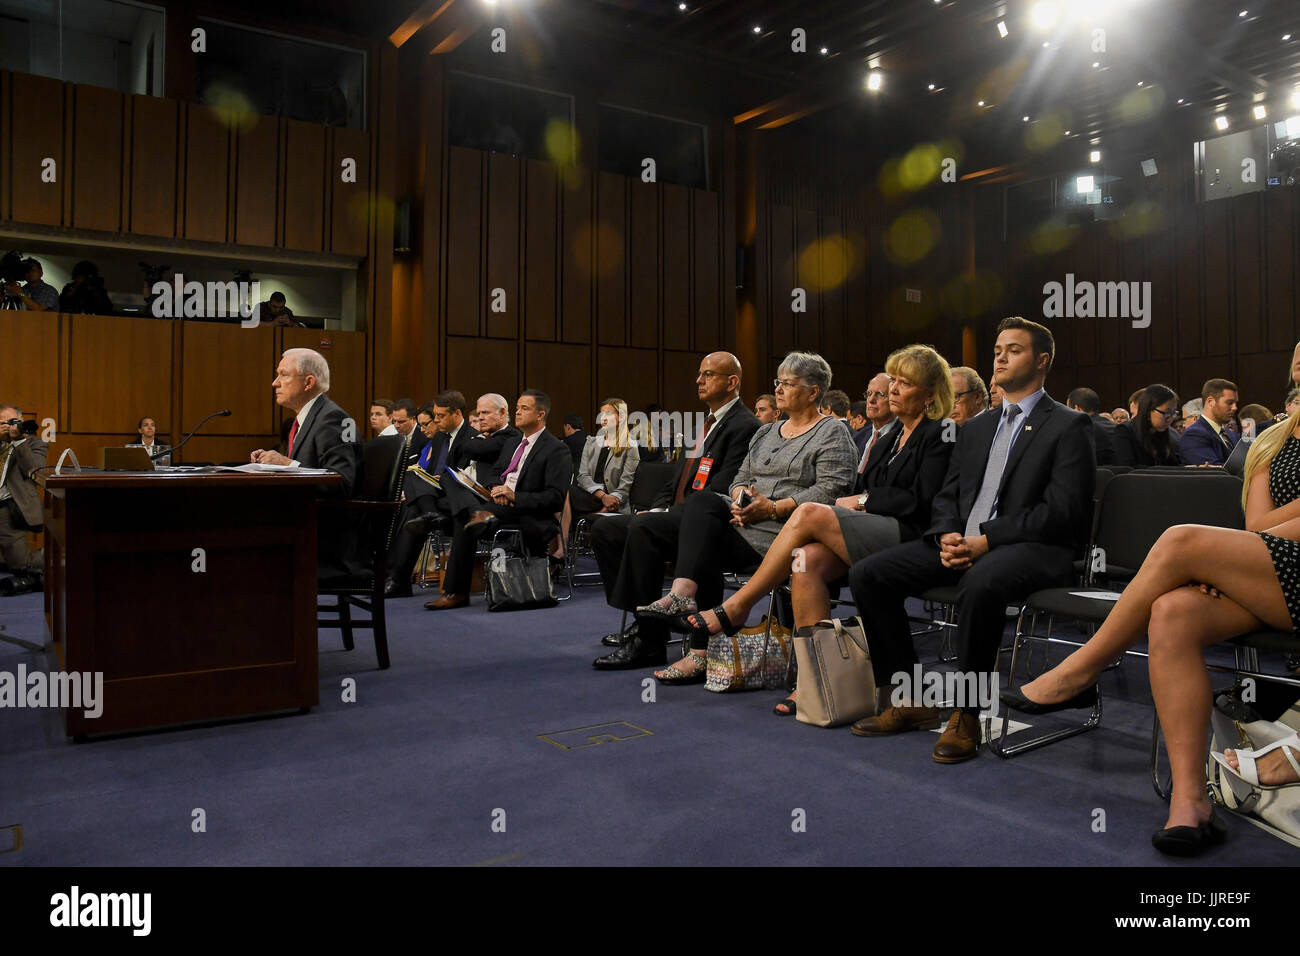 US. Attorney General Jeff Sessions with his family seated in the front row behind him in the Hart Senate Office building during his testimony in front of the Senate Intelligence  Committee, Washington DC, June 13, 2017. Stock Photo